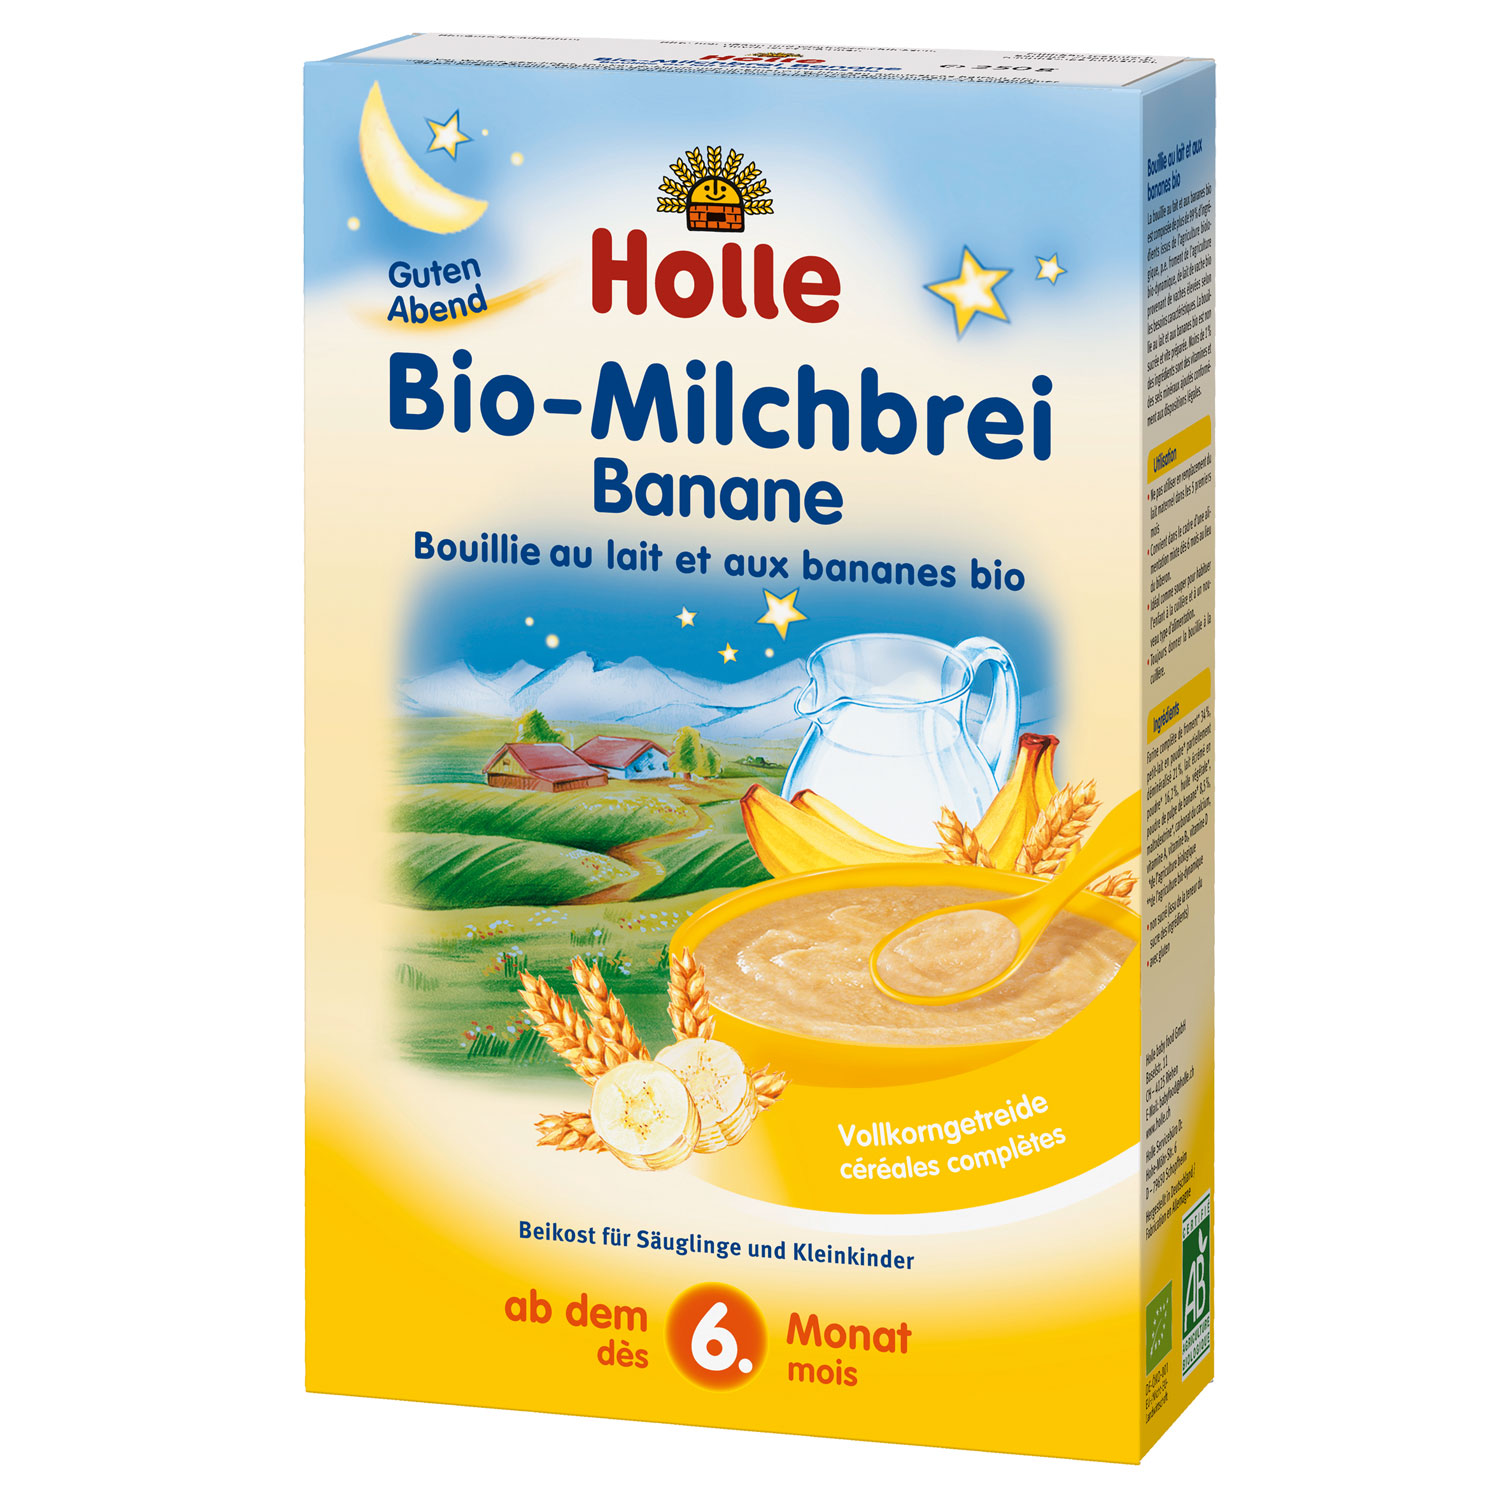 holle organic cereal